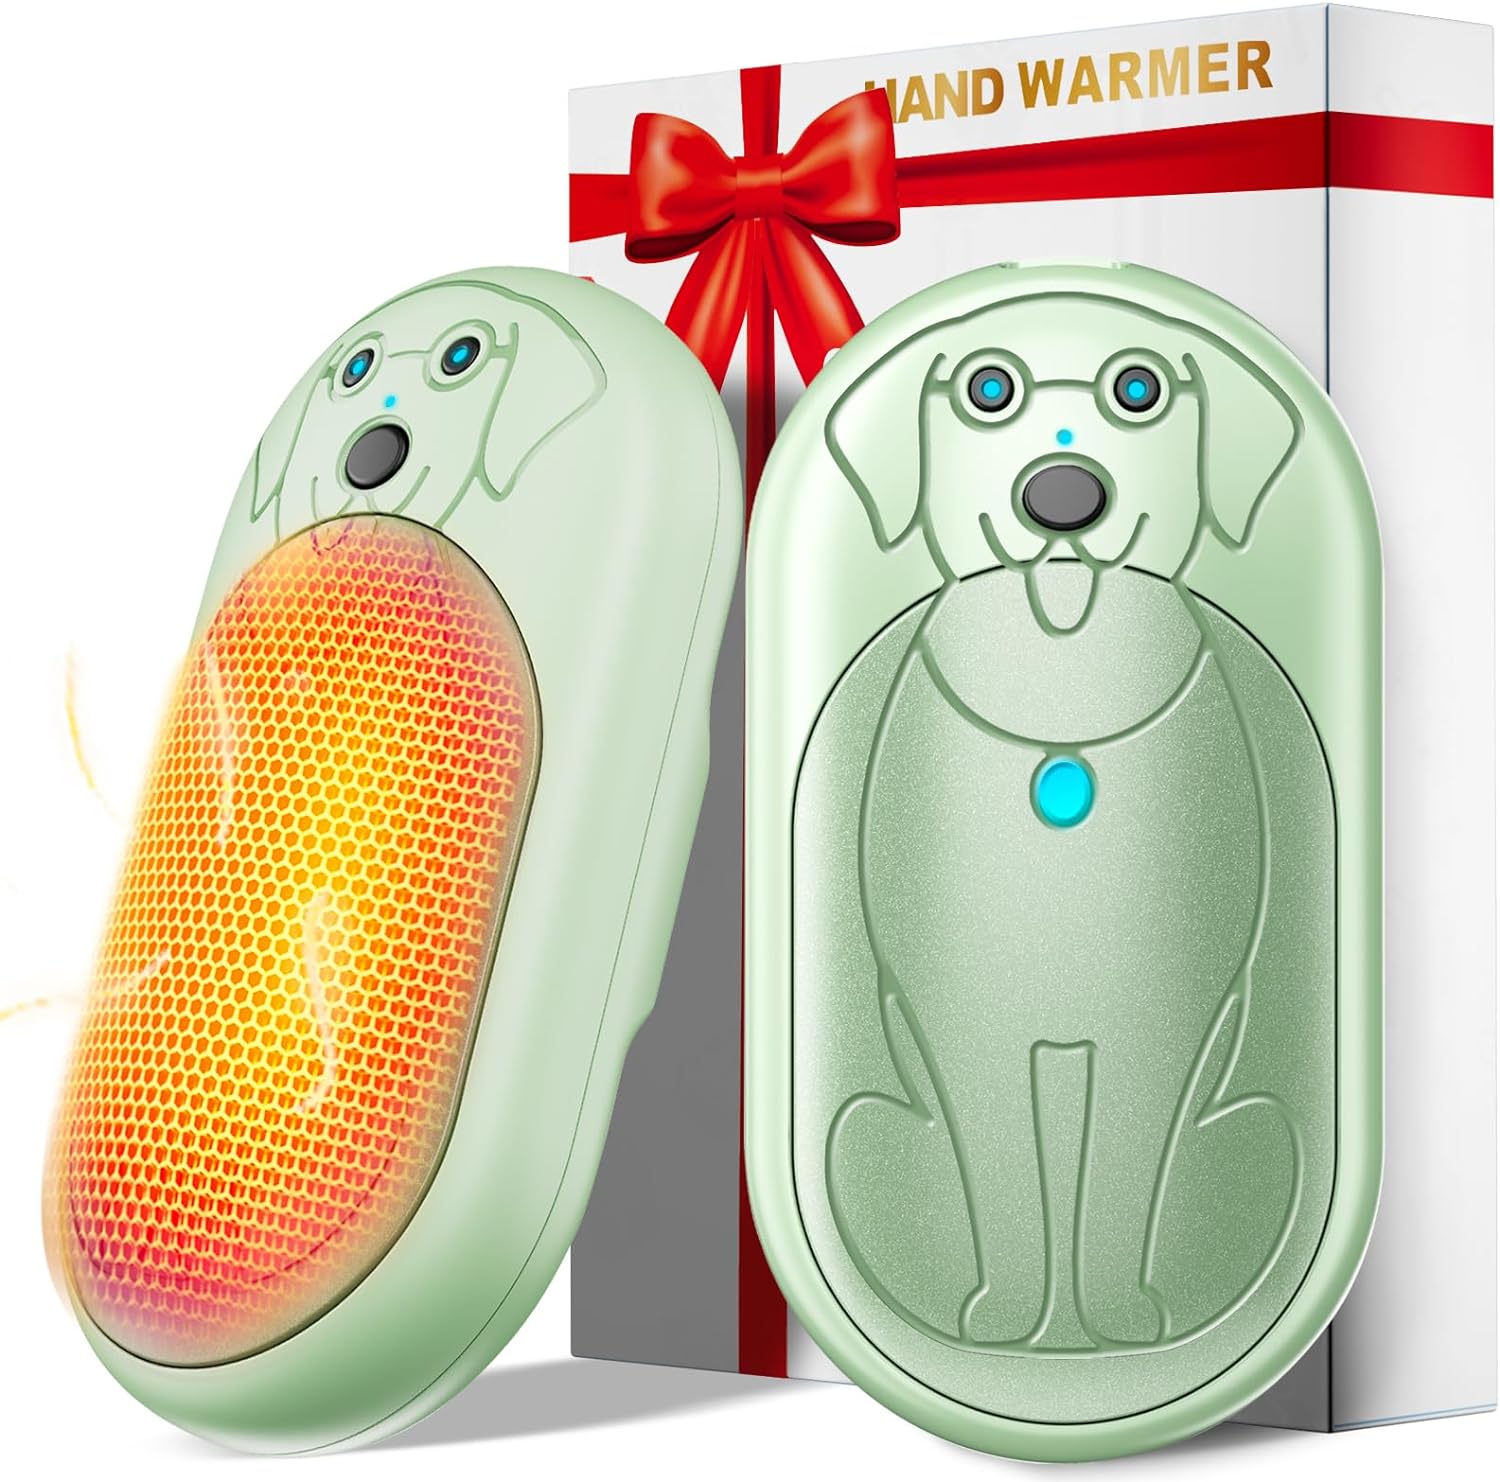 Electric Hand Warmers 2 Pack, Rechargeable 6000Mah Portable Hand Warmer Battery Operated Hand Warmers